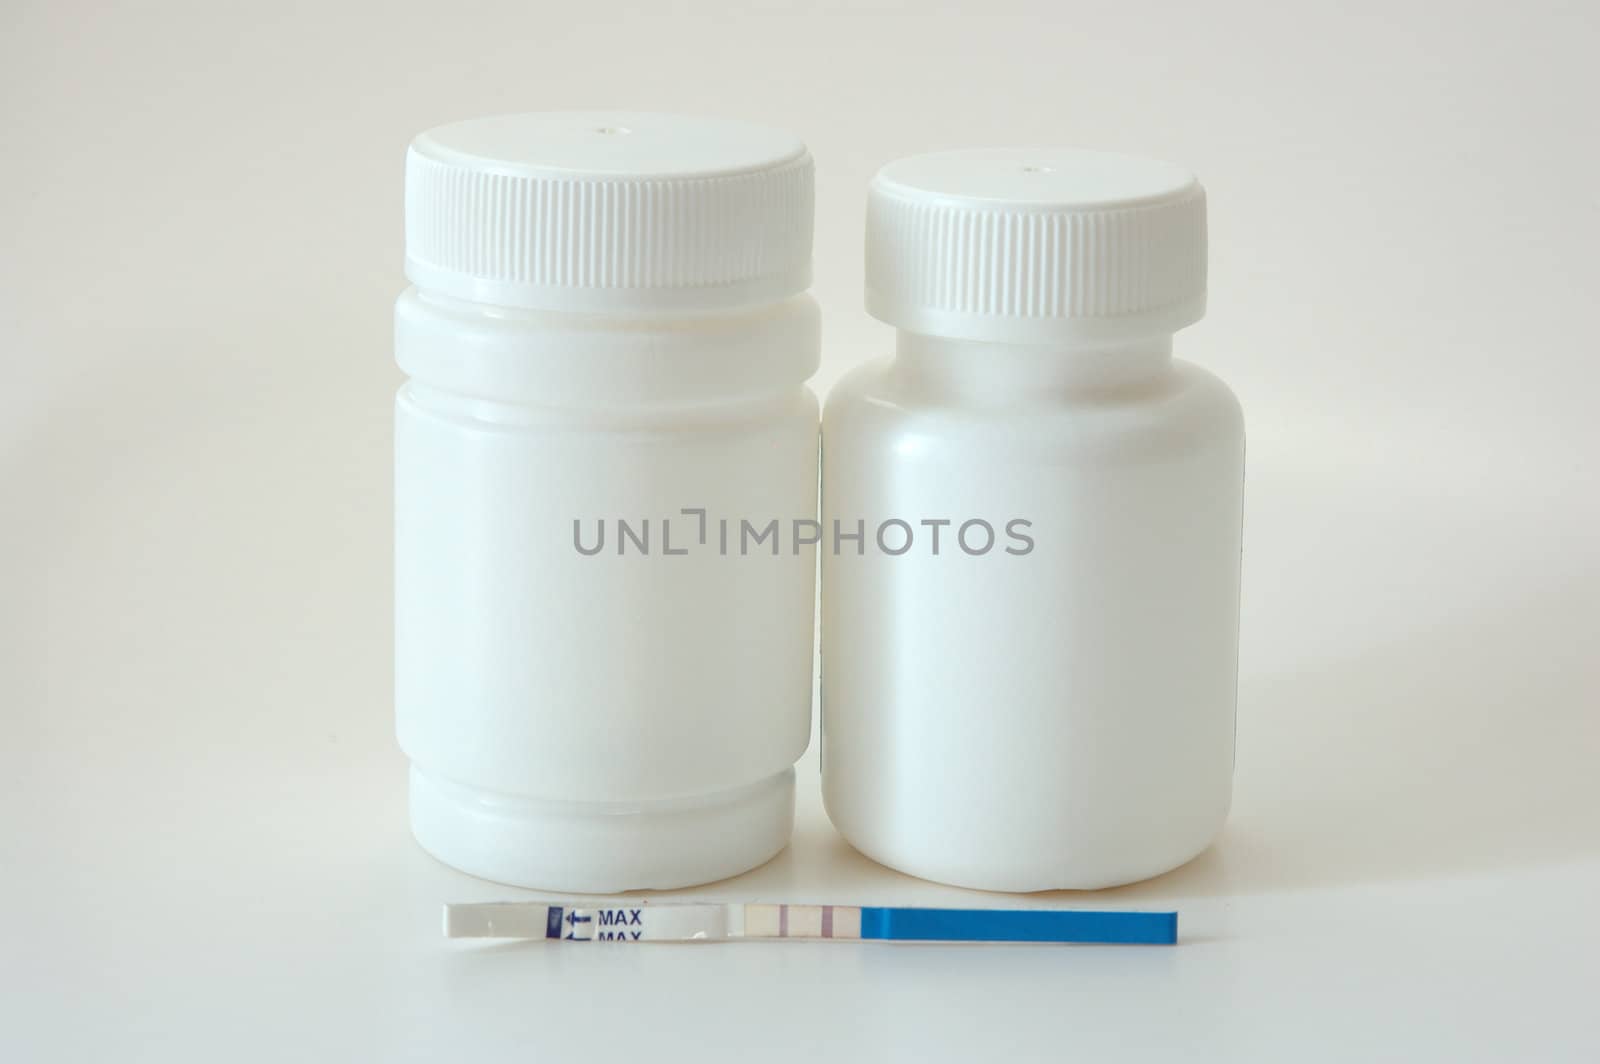 Confirmative pregnancy test and two drug's (vitamins) bottles.